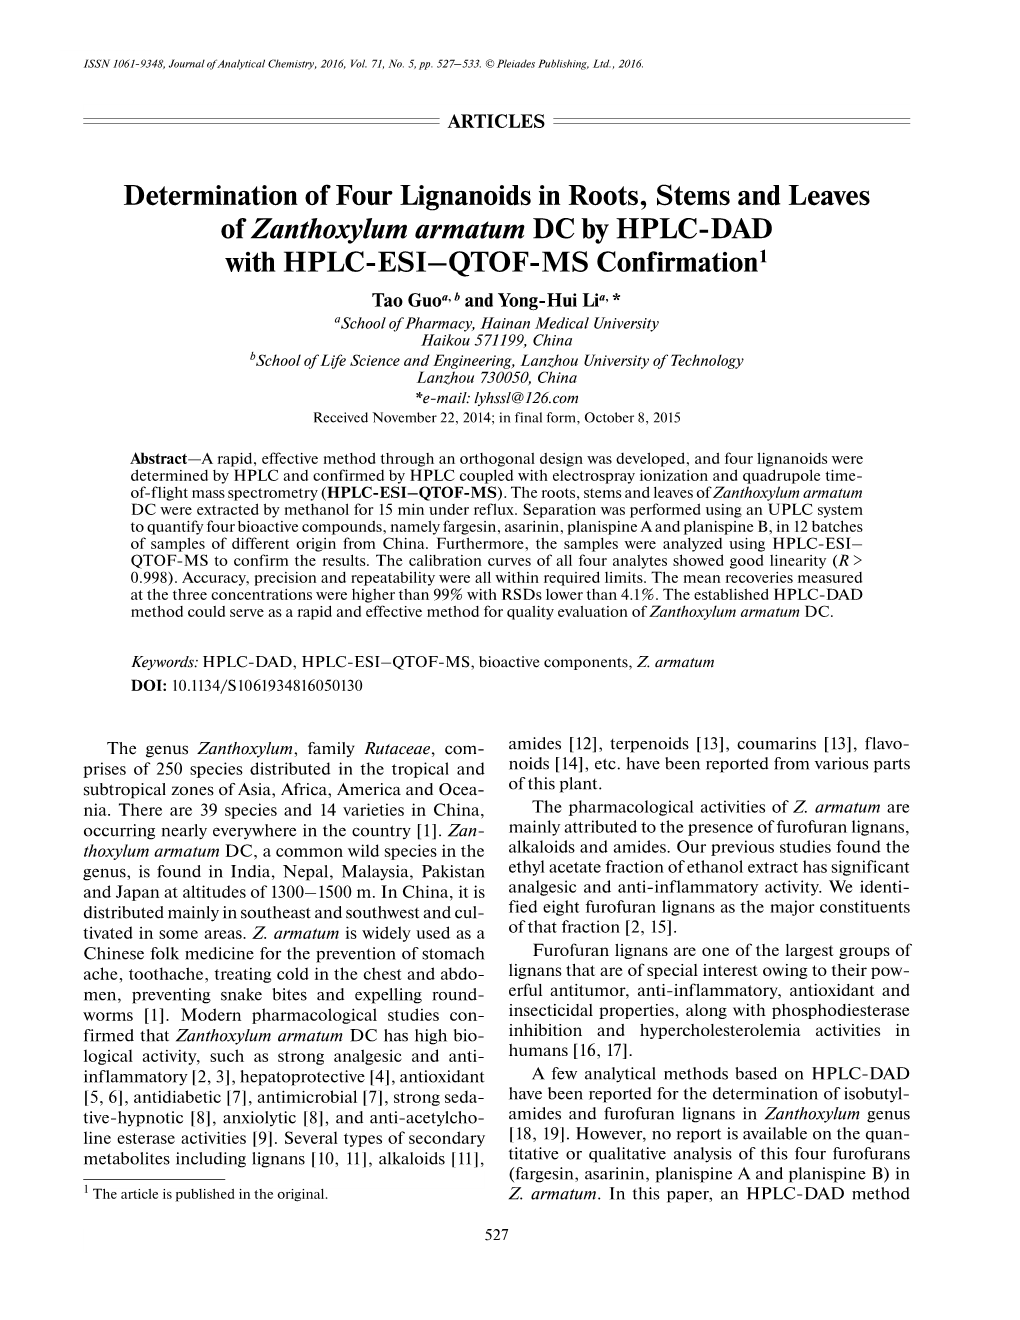 Determination of Four Lignanoids in Roots, Stems and Leaves Of